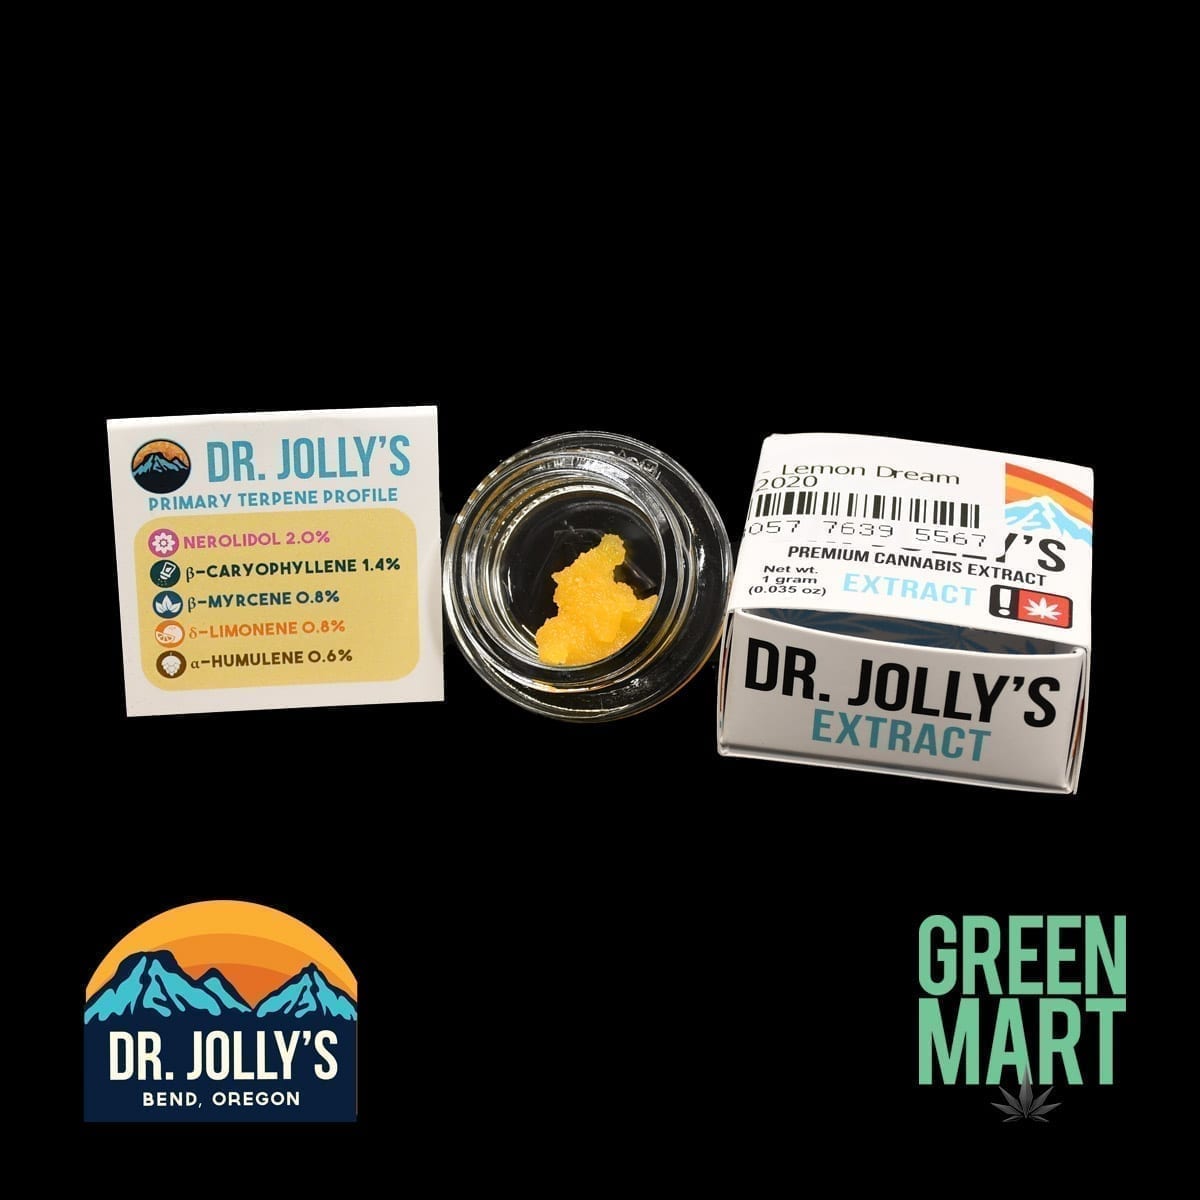 Dr. Jolly's Extracts - Lemon Dream Terps